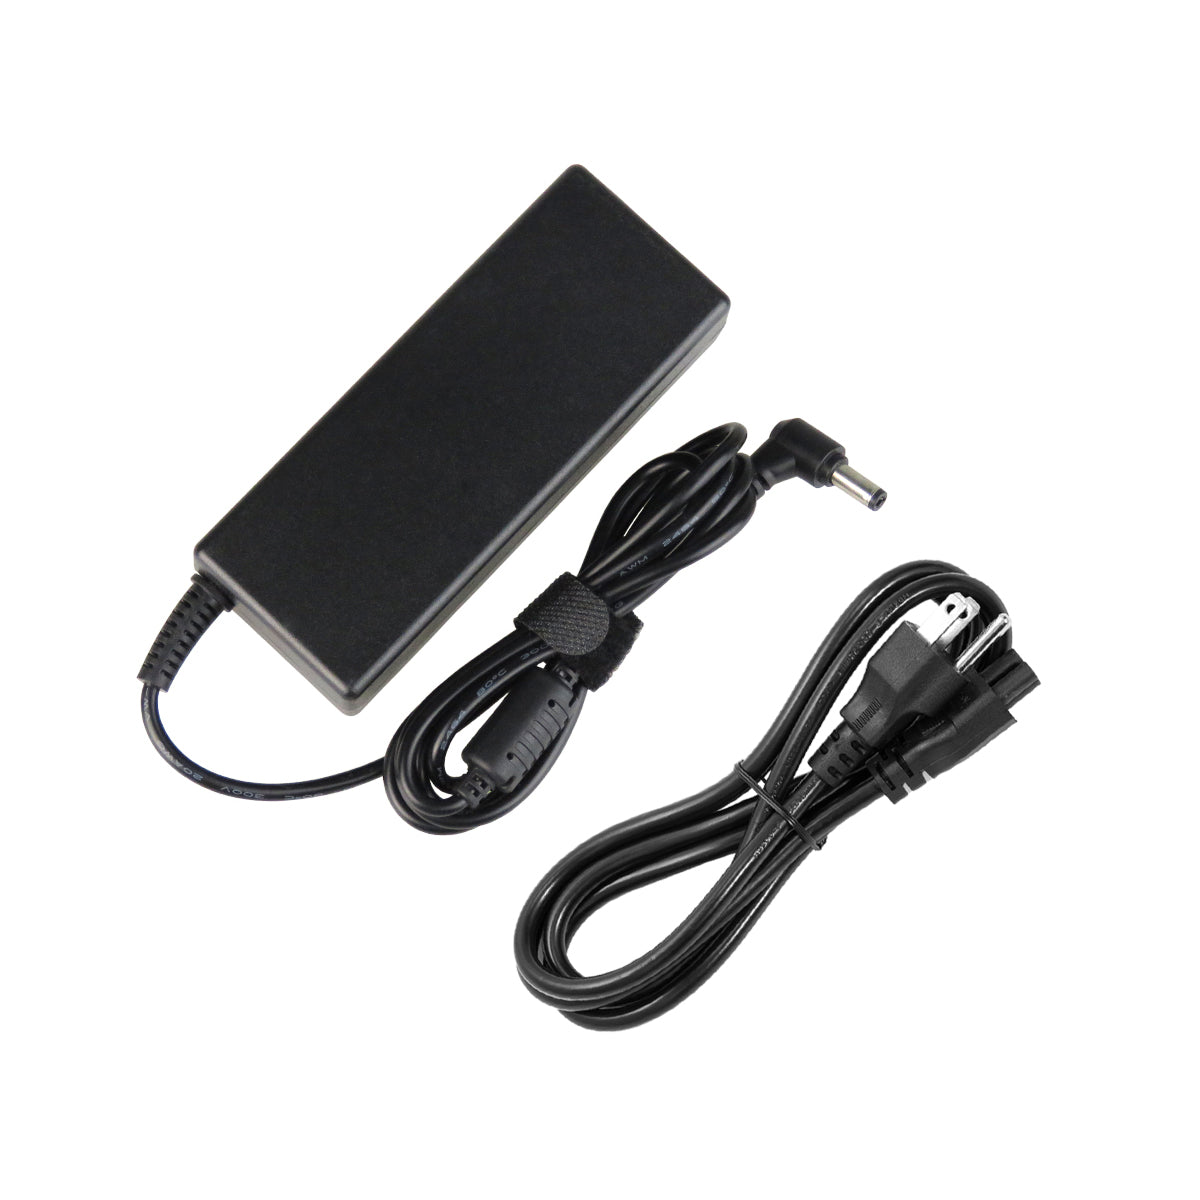 AC Adapter Charger for ASUS N43JN Notebook.